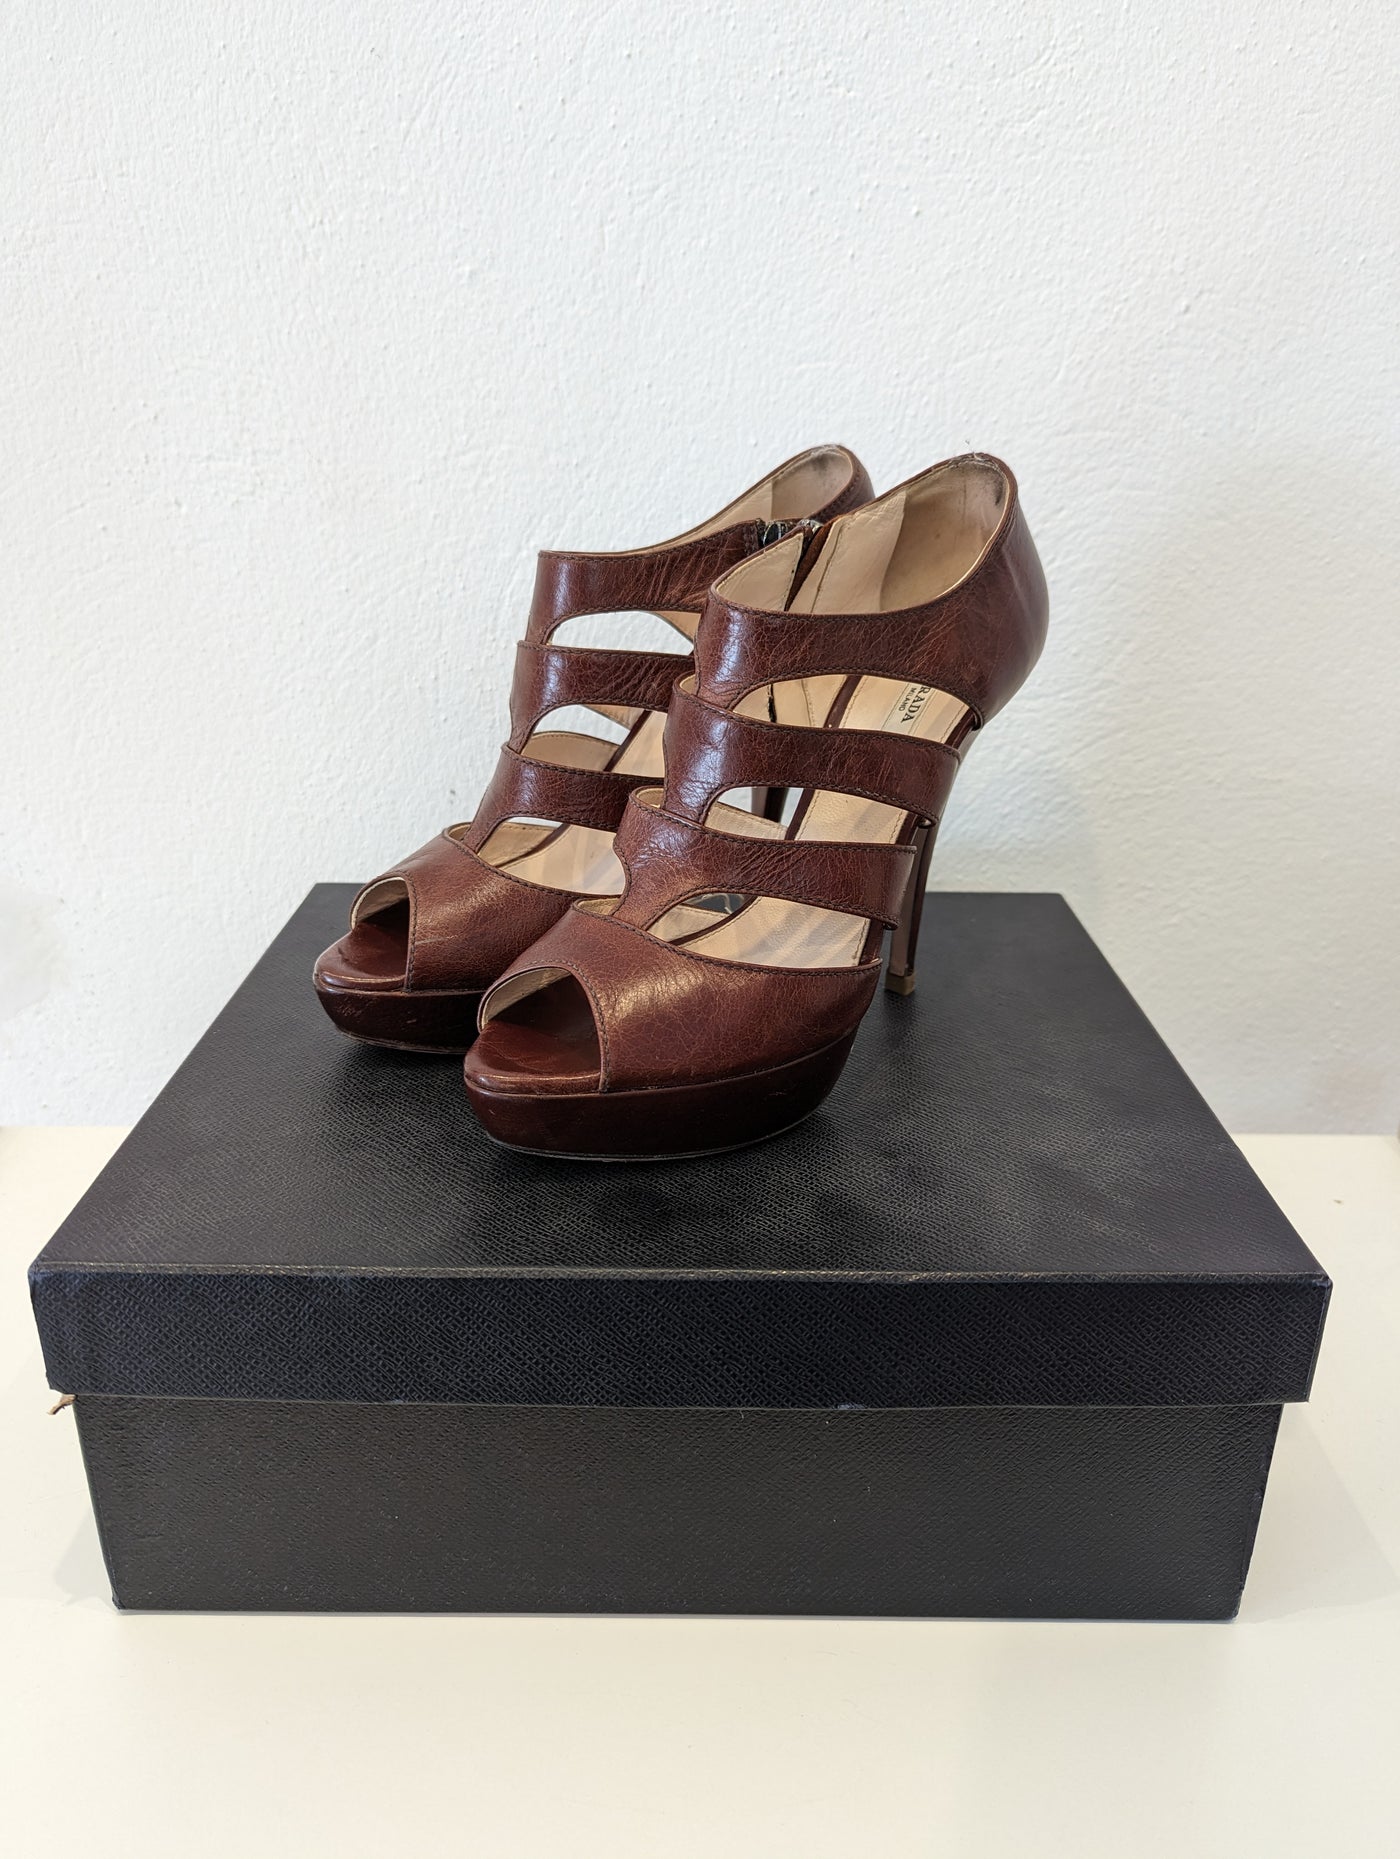 Prada Brown Leather Strappy Shoes Size 38.5